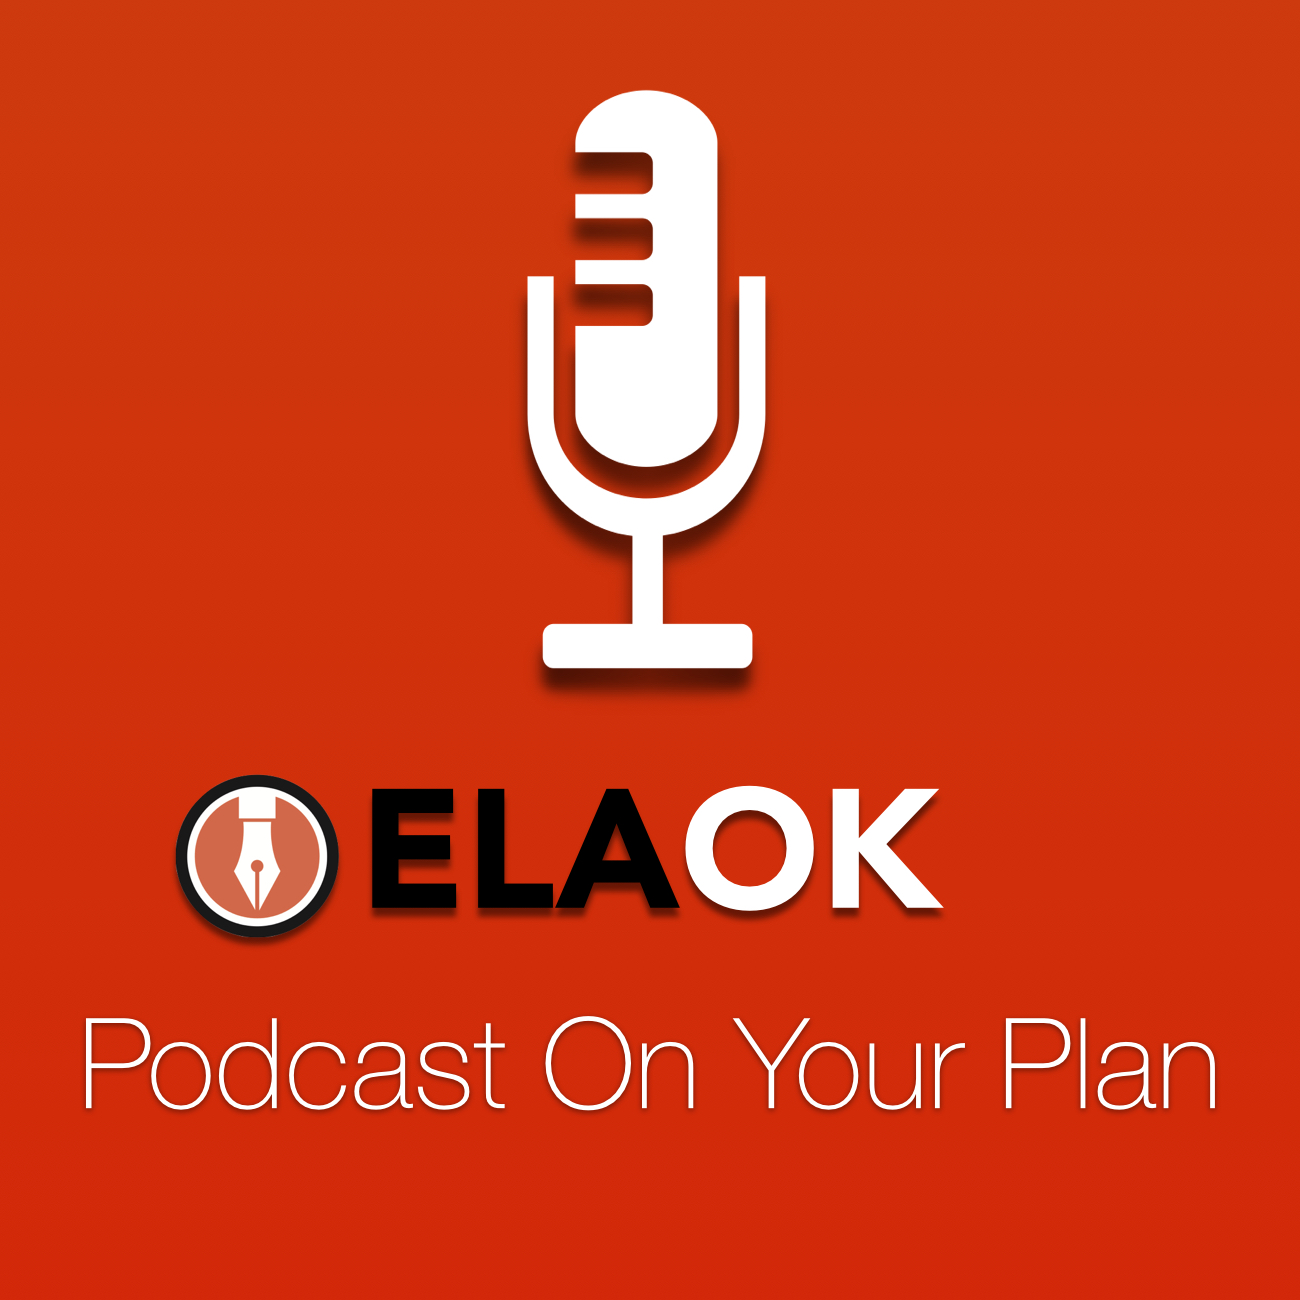 Podcast On Your Plan